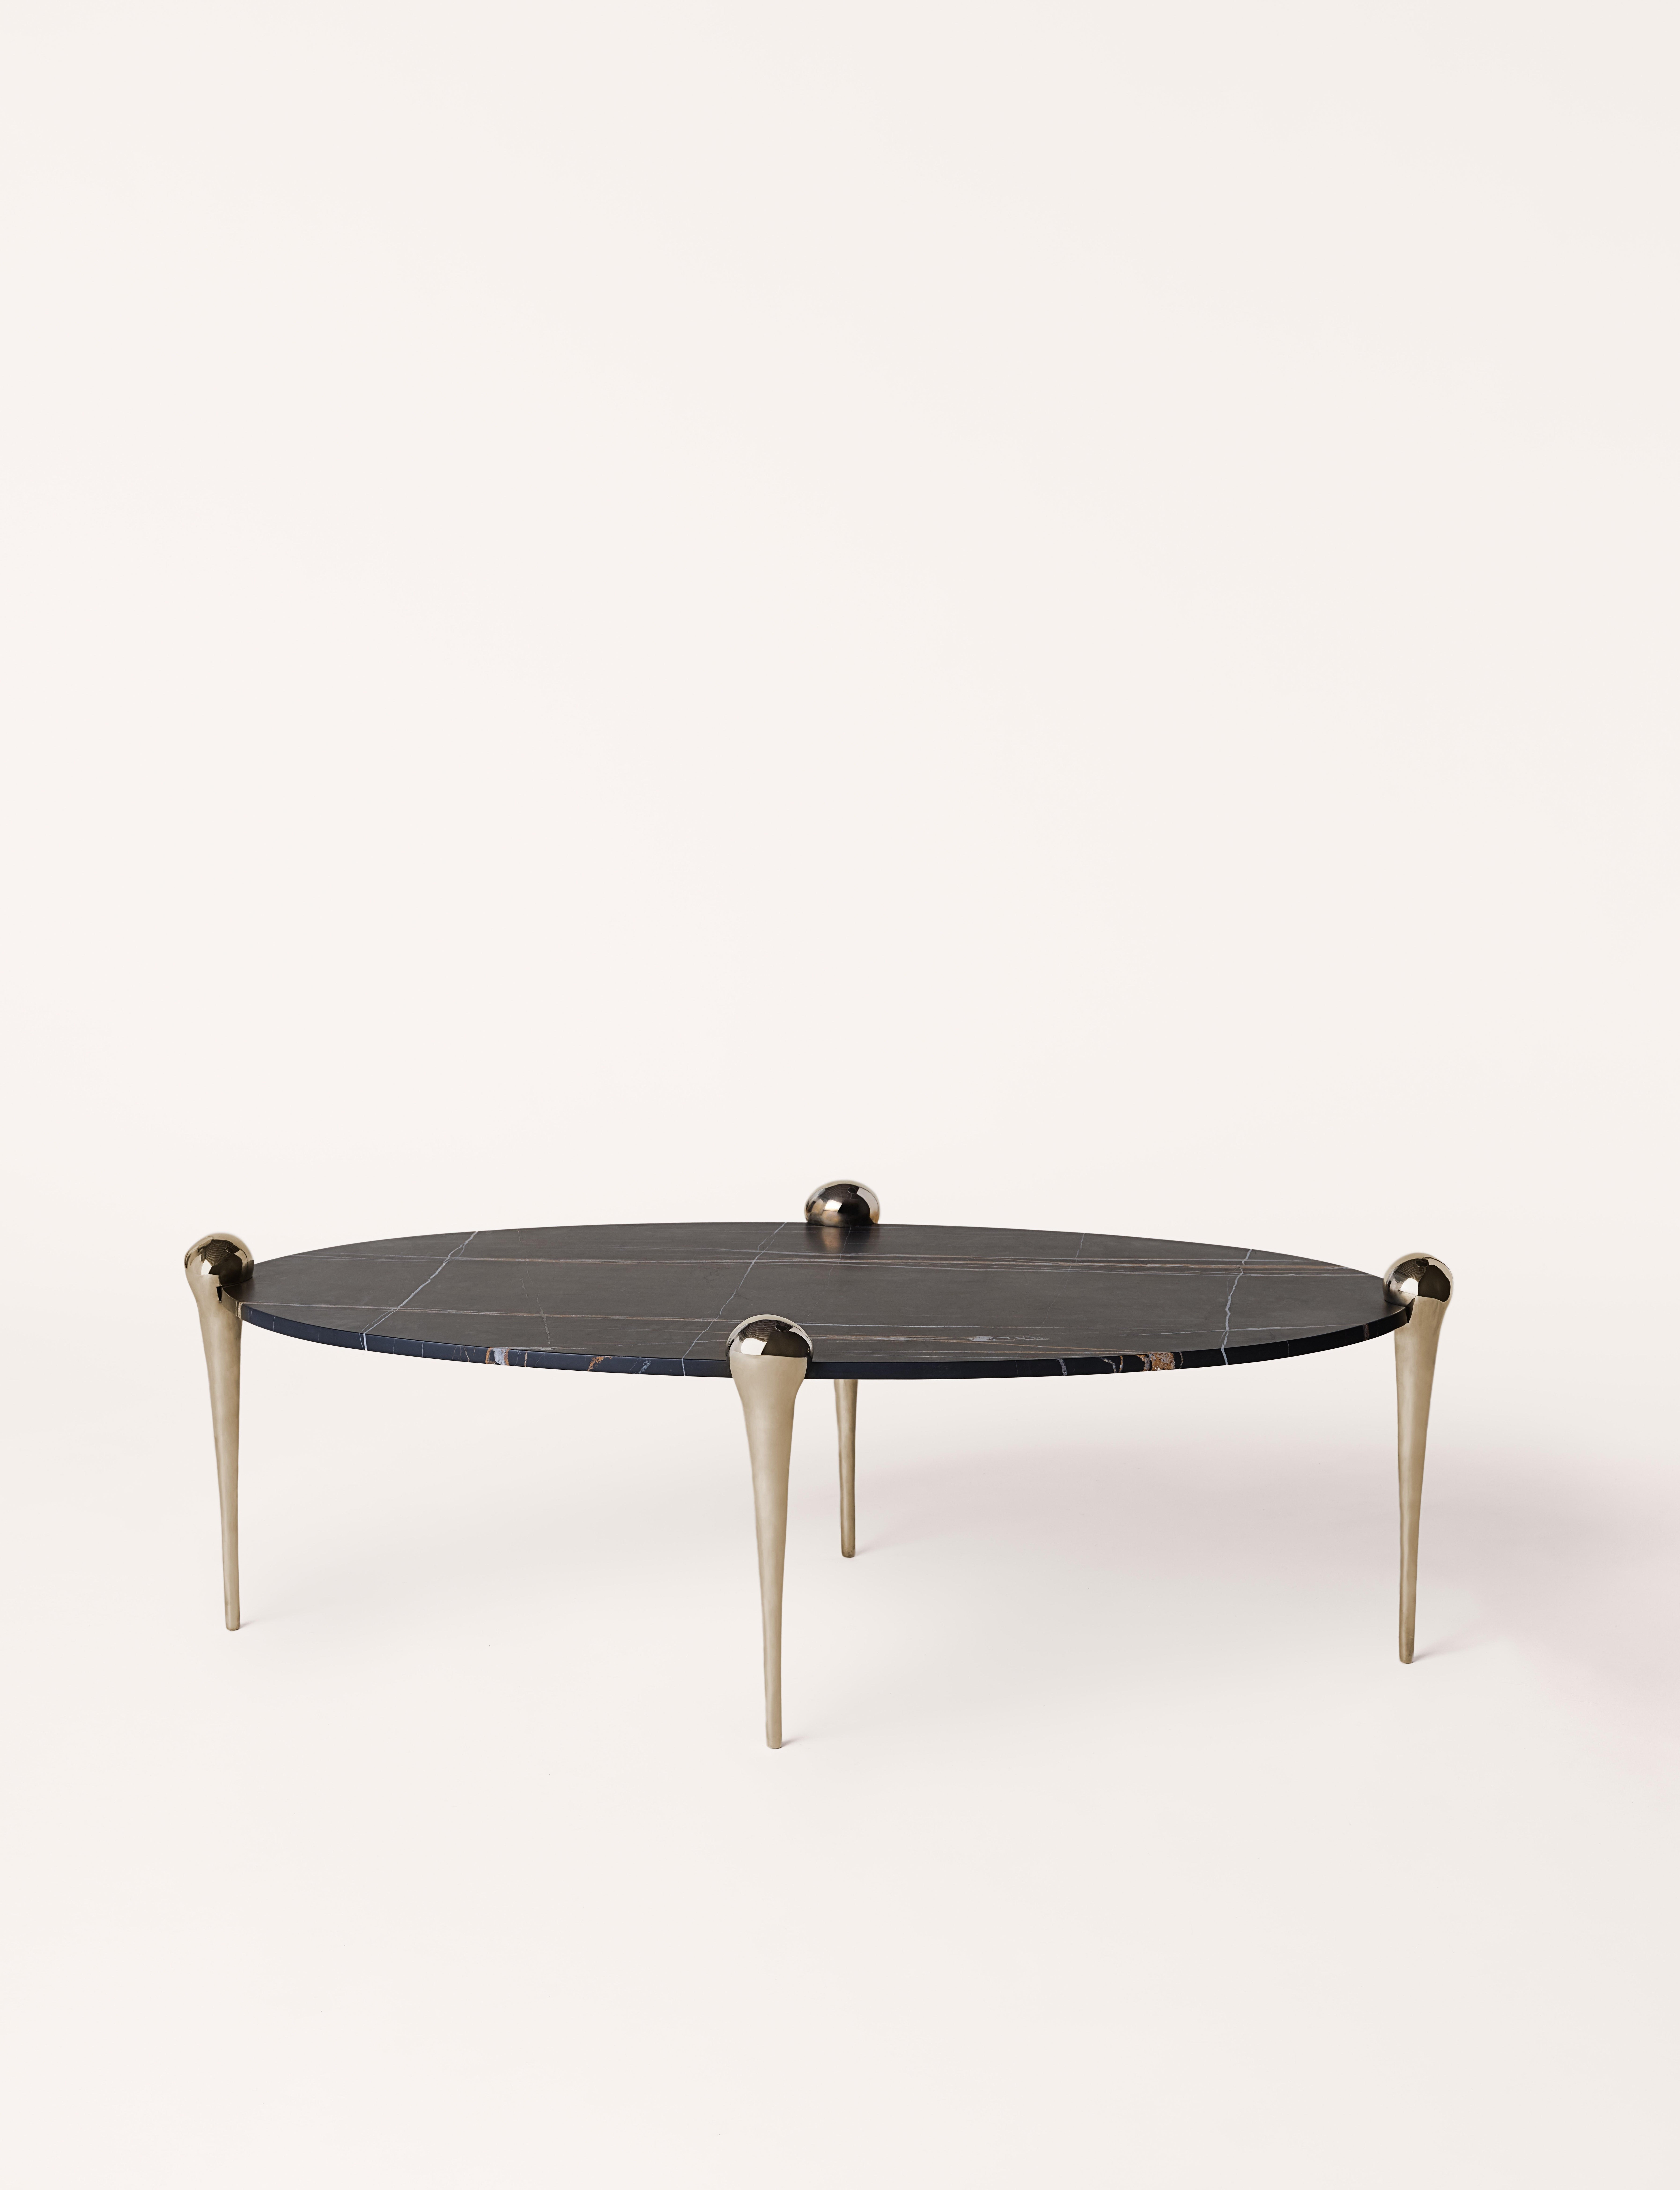 Cast Konekt Petra Coffee Table with Carrara Marble and Bronze For Sale